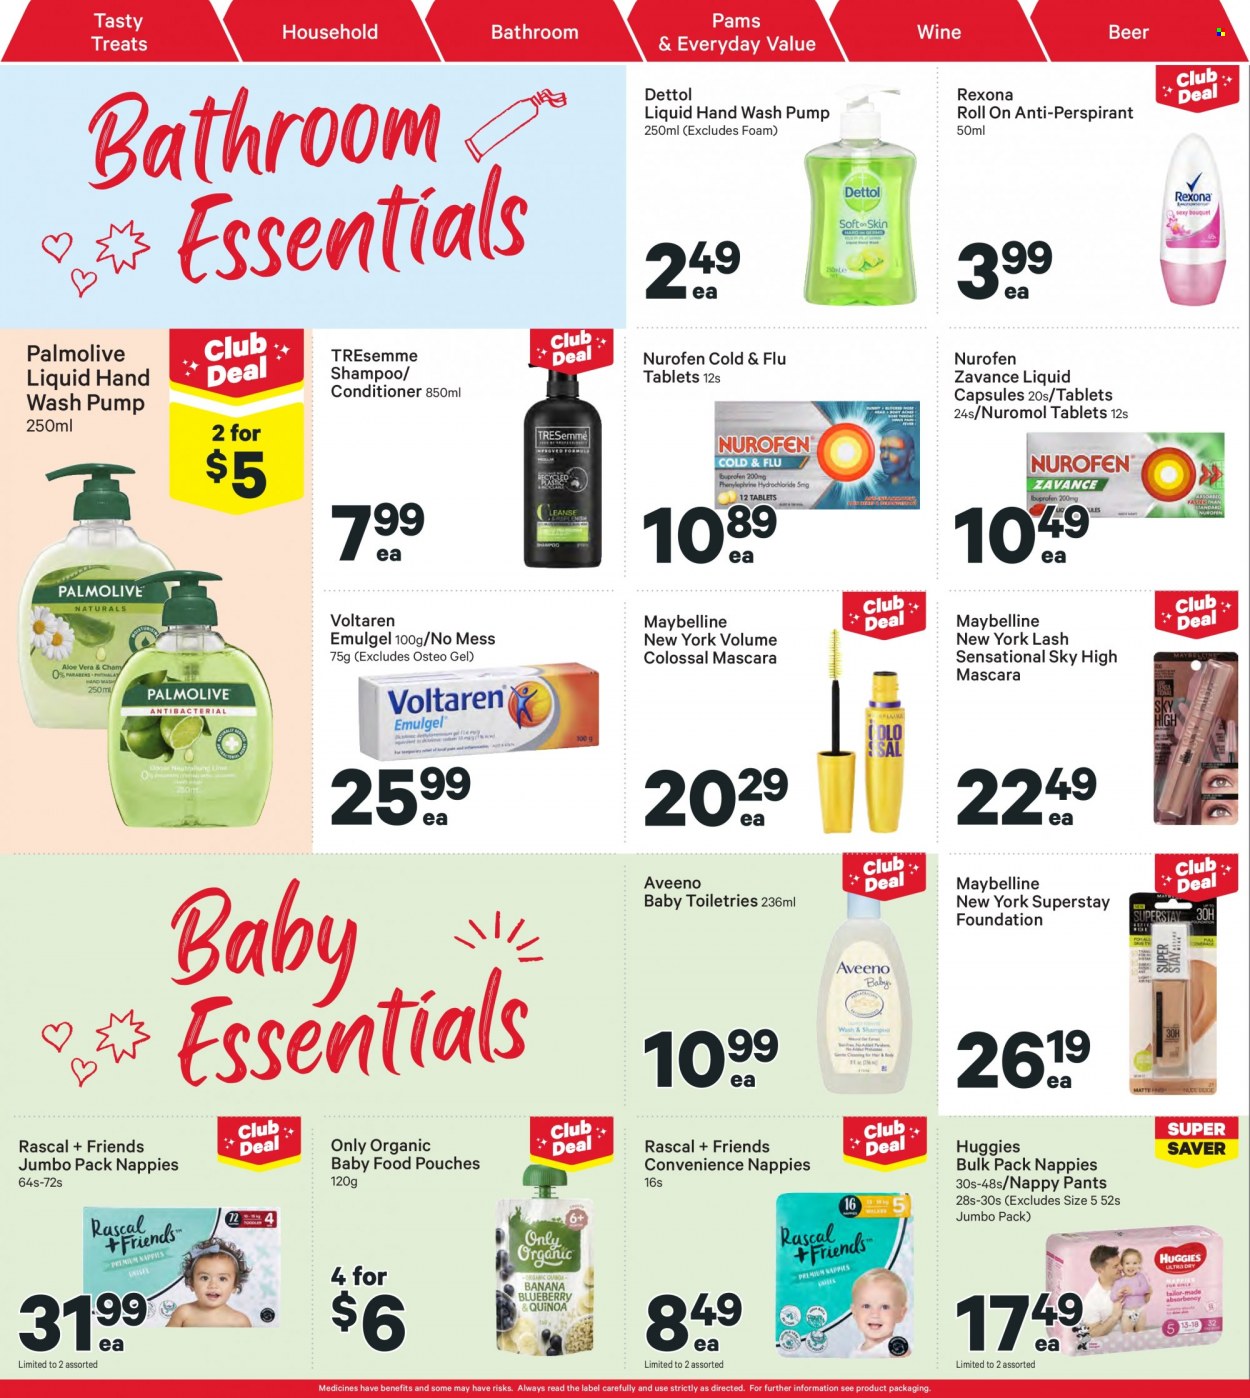 thumbnail - New World mailer - 16.05.2022 - 22.05.2022 - Sales products - wine, beer, organic baby food, Huggies, pants, nappies, Aveeno, Dettol, shampoo, hand wash, Palmolive, conditioner, TRESemmé, anti-perspirant, Rexona, roll-on, mascara, Maybelline, Cold & Flu, Nurofen. Page 26.